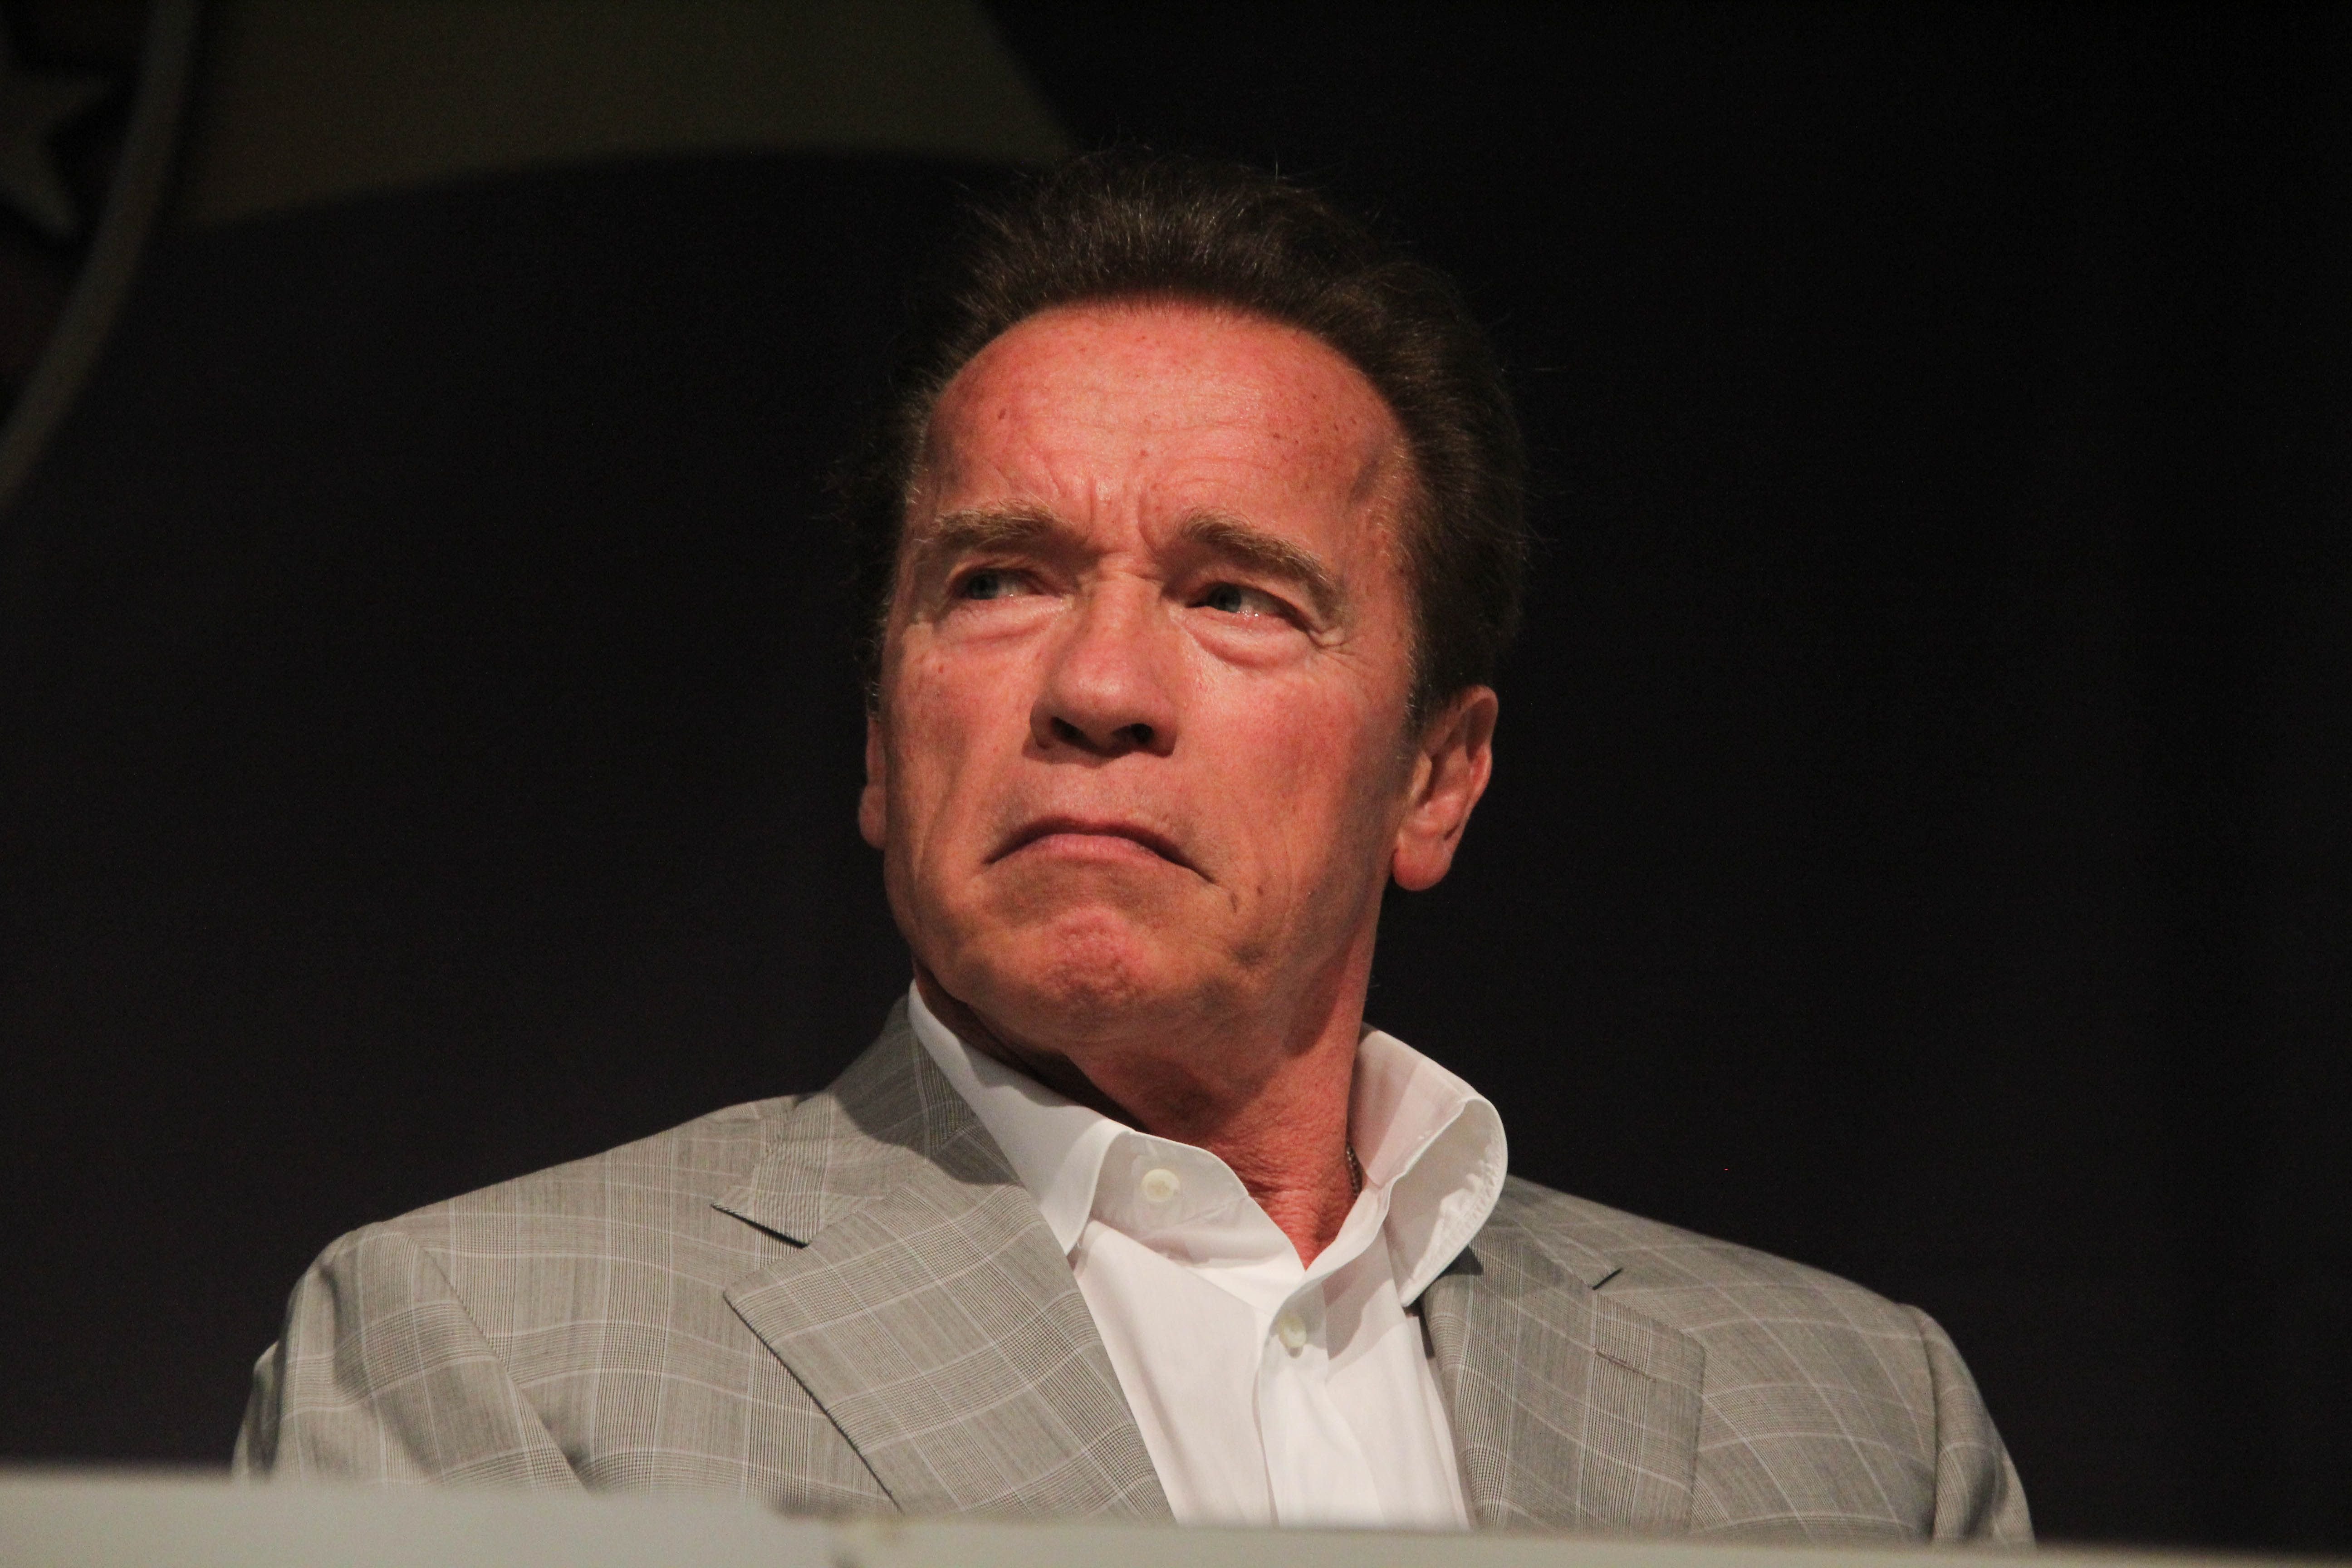 Arnold Schwarzenegger during press conference of Arnold Classic Brazil in Rio De Janeiro on April 3, 2016 | Source: Shutterstock